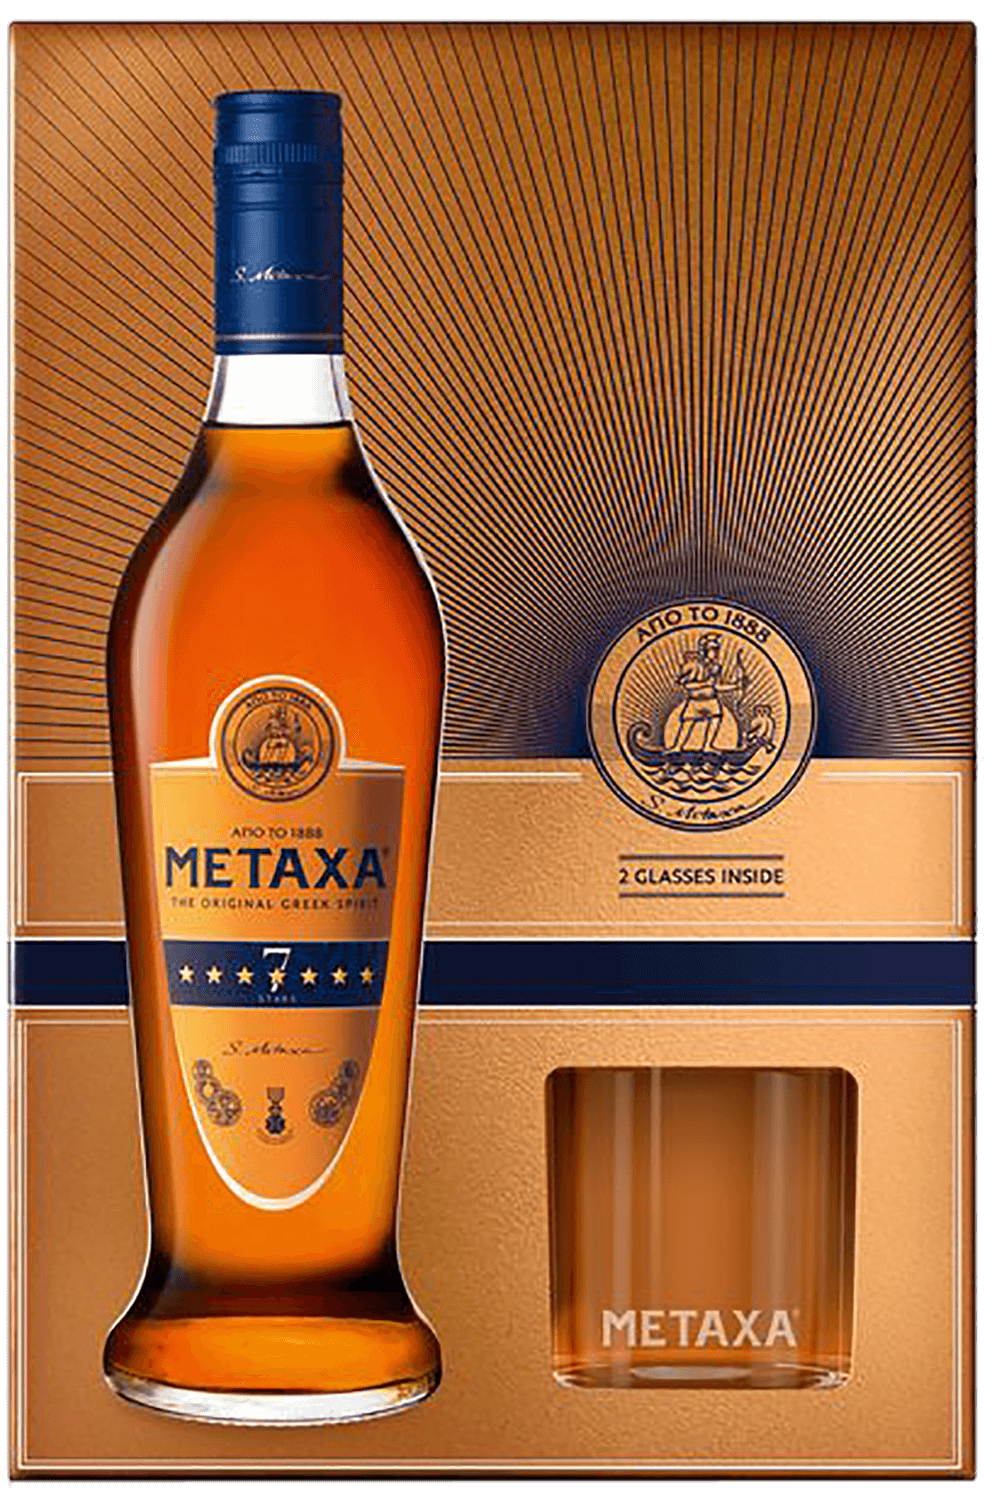 metaxa 5 stars gift box Metaxa 7 stars (gift box with two glasses)